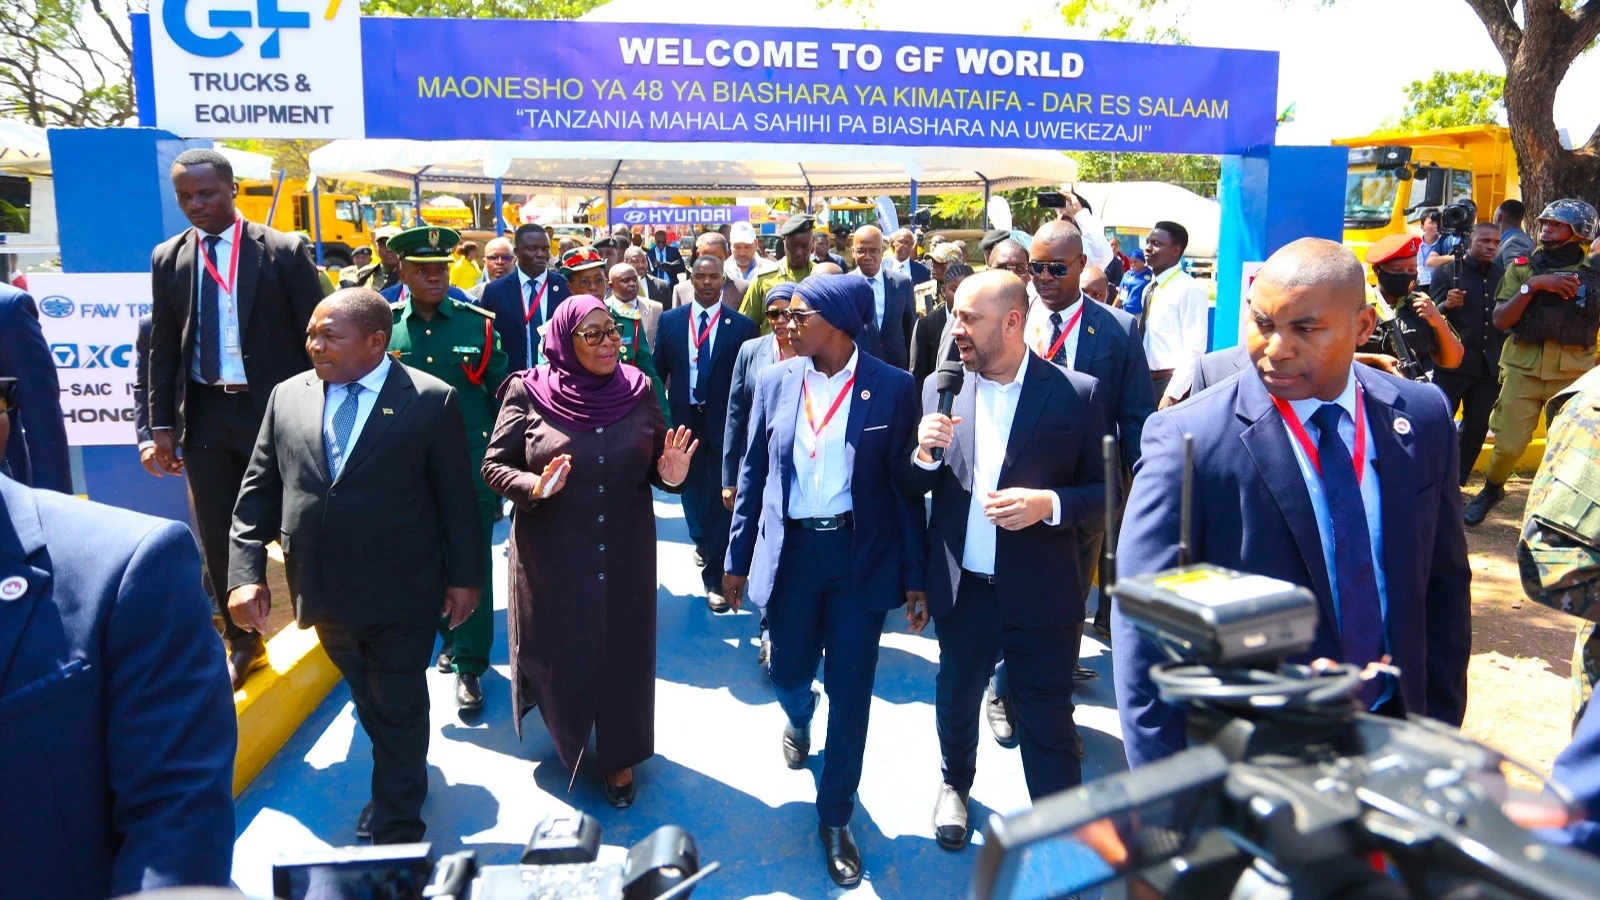 
President Samia Suluhu Hassan shares a word with Imrani Karmali, executive director of vehicle assembling firm during the president's visit to the 48th DITF on Wednesday. Looking on (left) is Filipe Nyusi, Mozambican President.